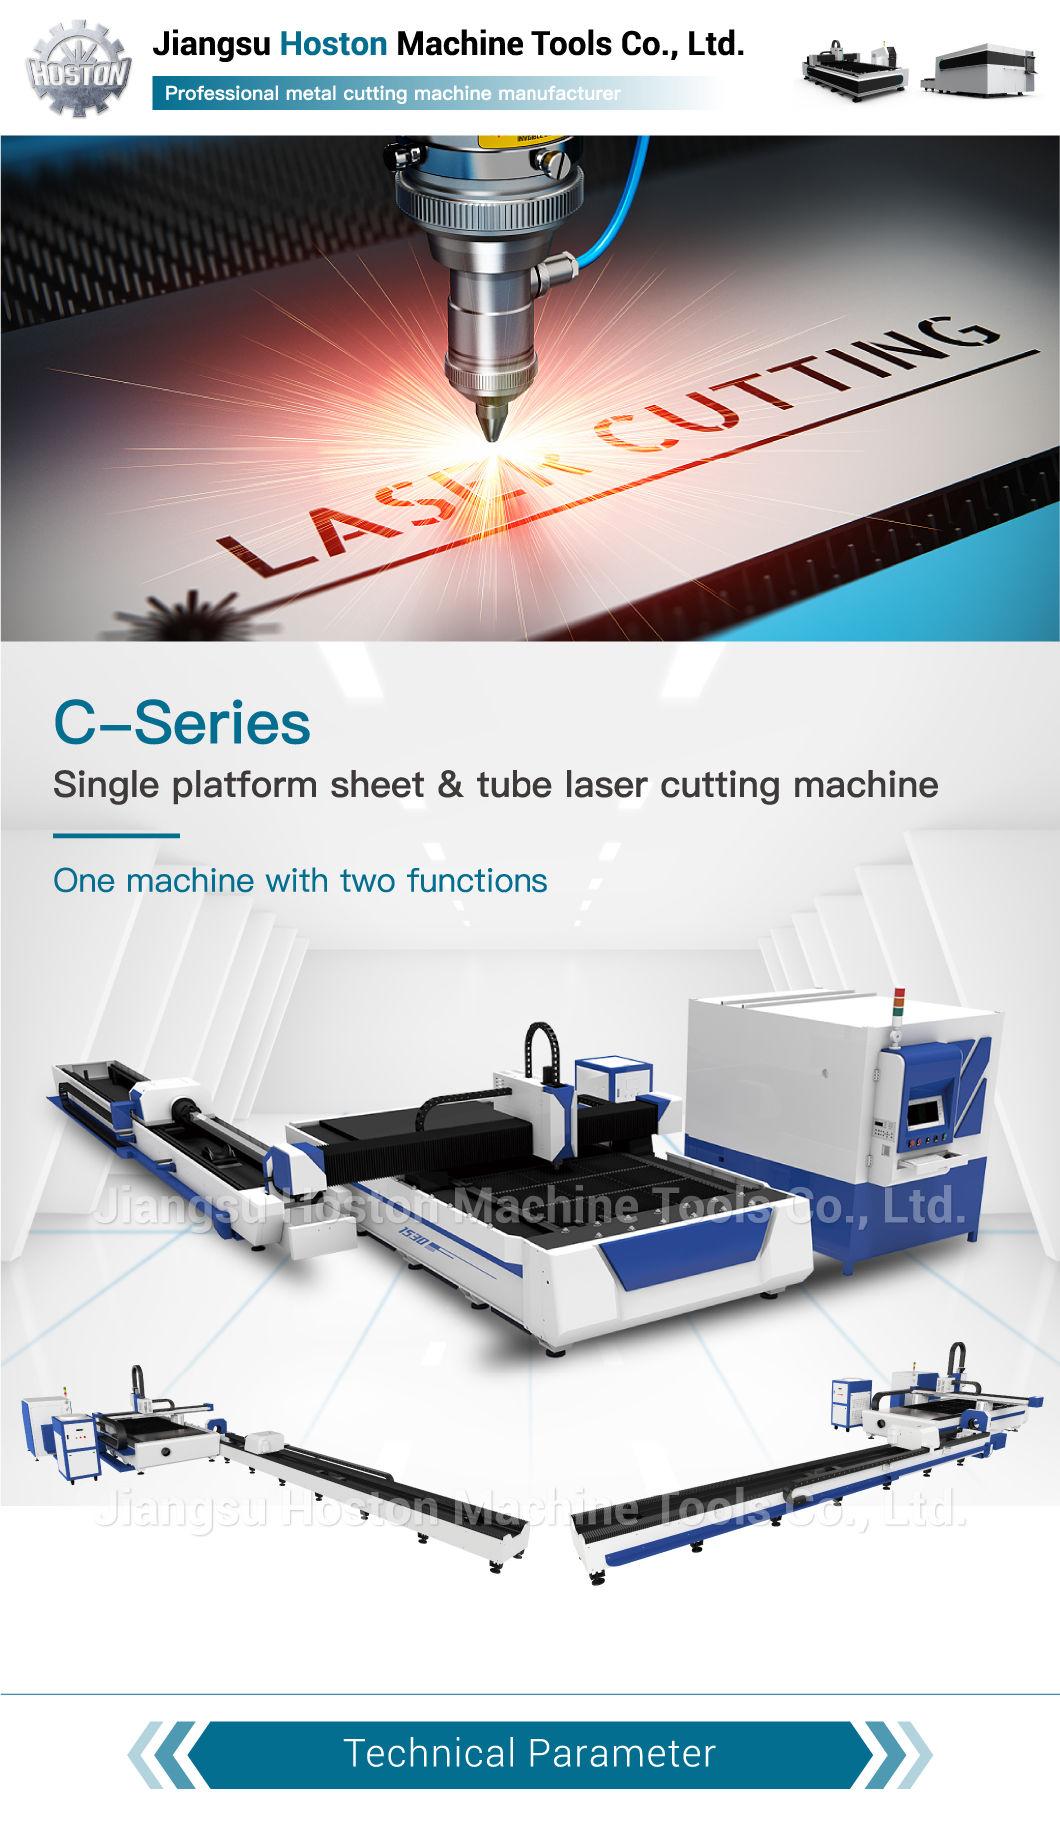 Factory Price Laser Cutting Machine for Stainless Steel, Carbon Steel